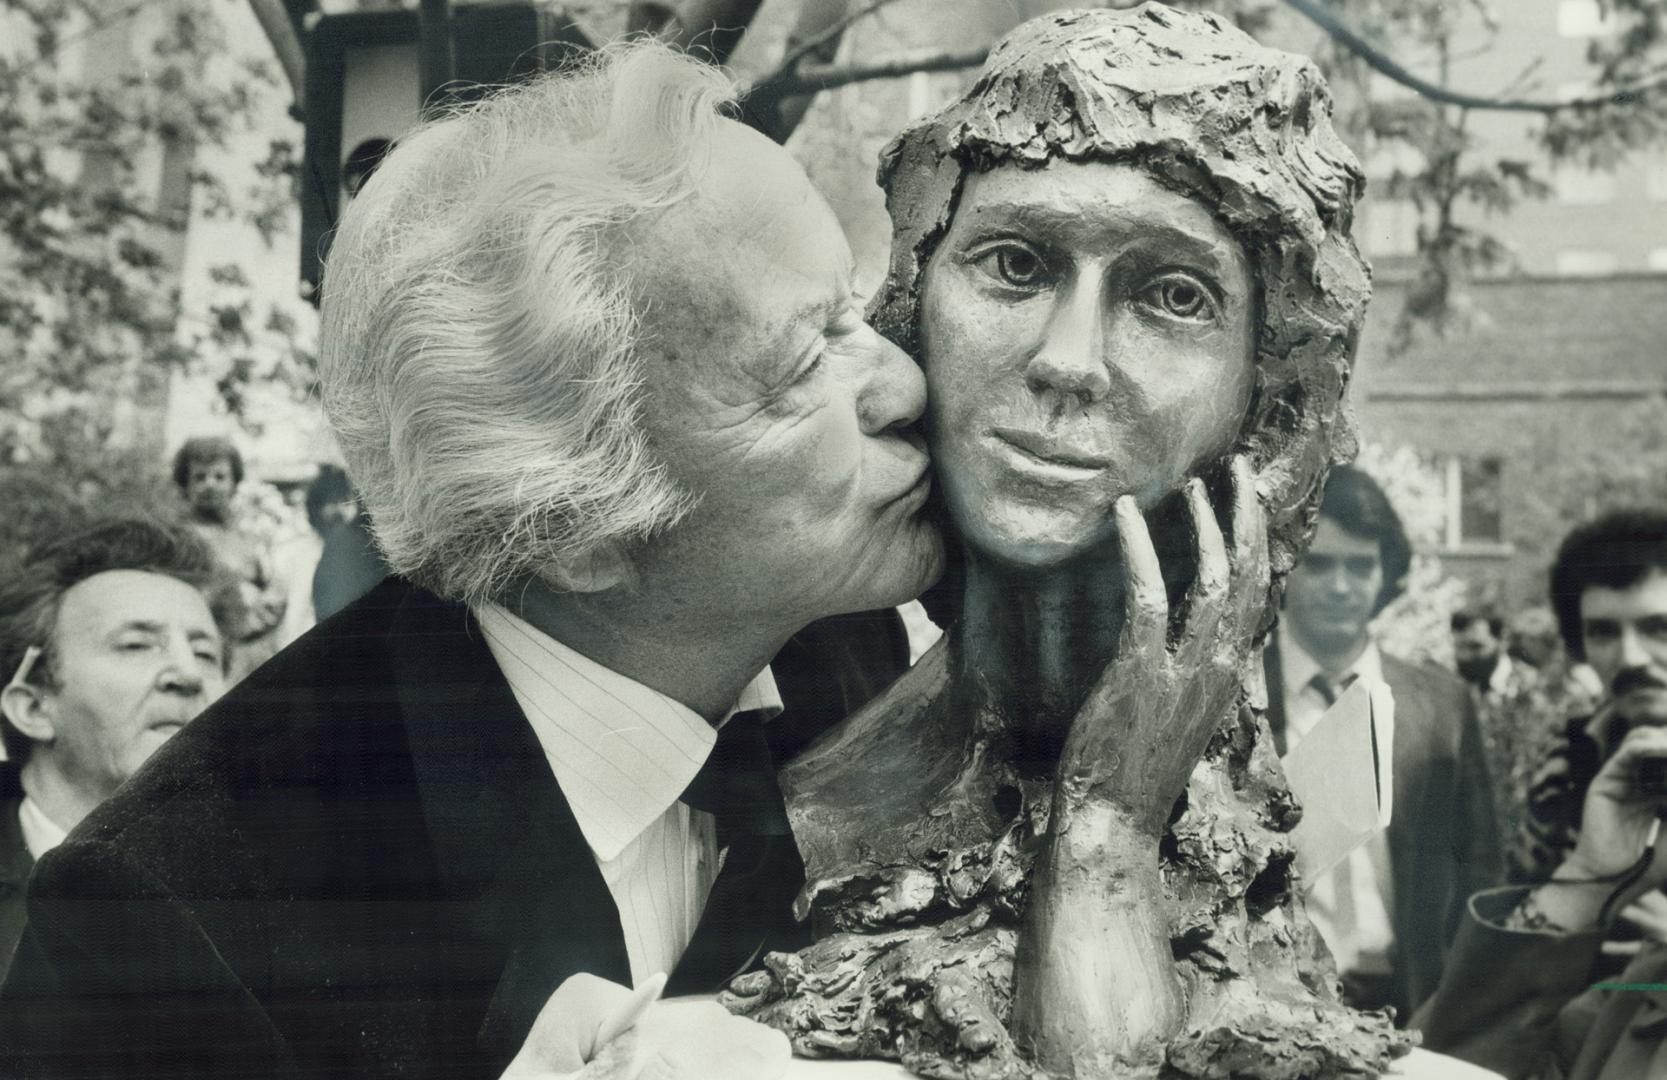 Pickford in bronze, Buddy Rogers, third and last husband of Mary Pickford, gives a peck on the cheek to a bronze sculpture of late film star. The bust(...)